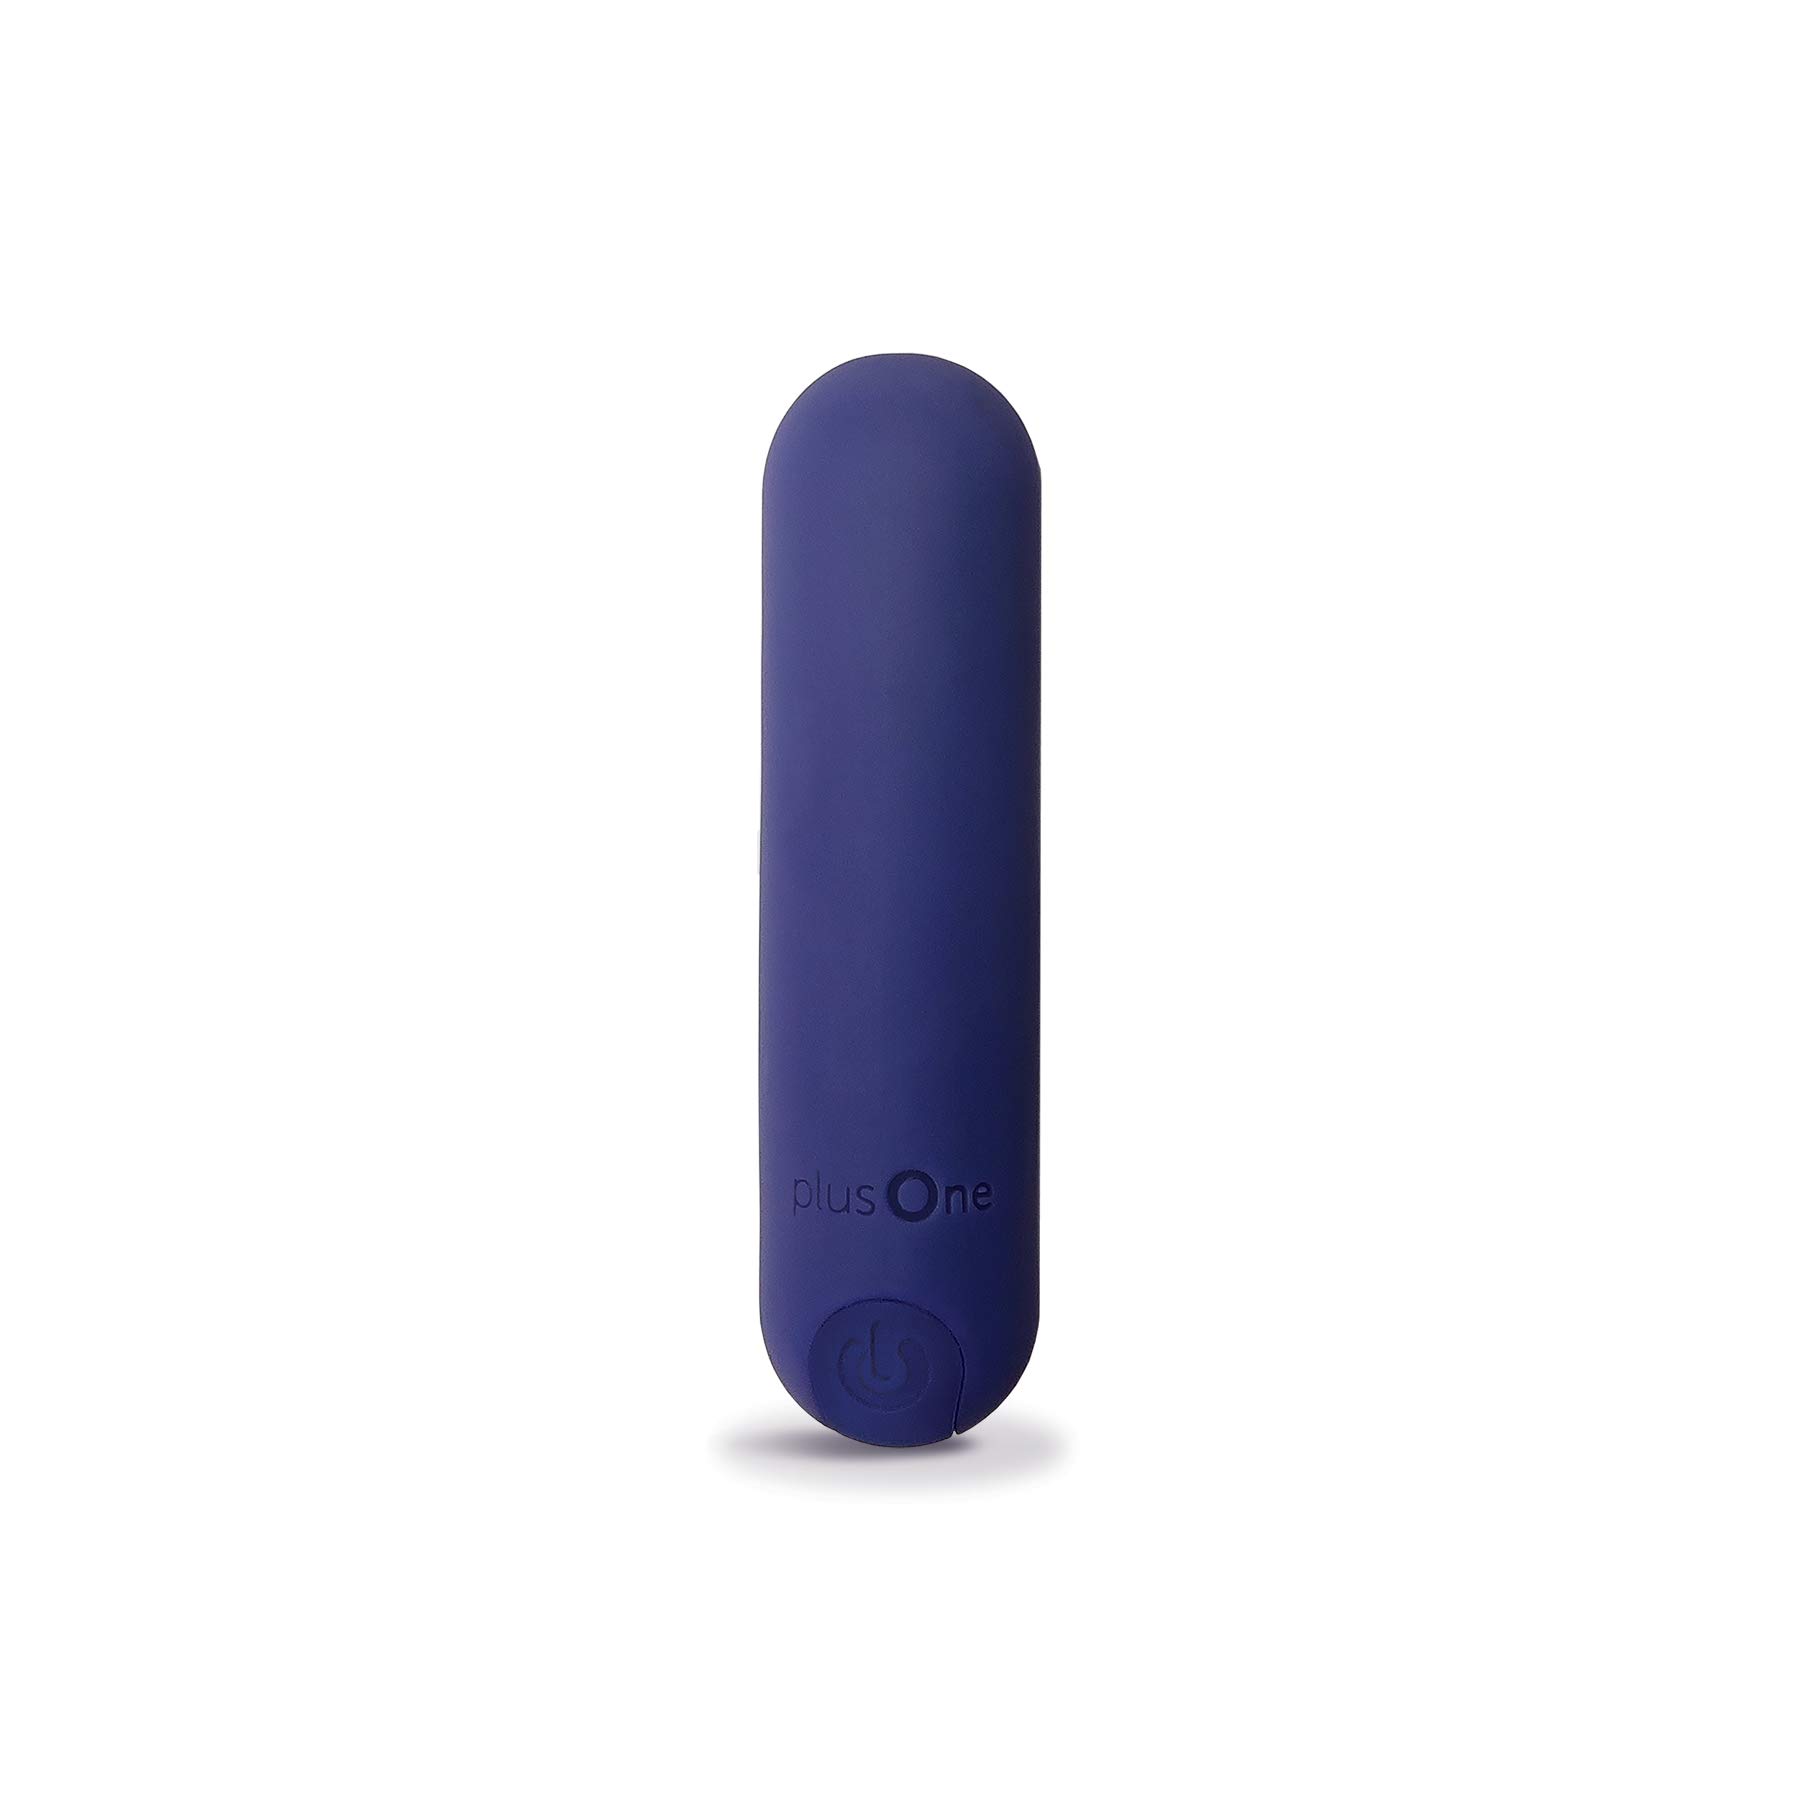 Small Lightweight-100% Waterproof-Body Safe Silicone -Flexible Head - 10  Vibration Patterns- Adult Sex Toy Personal Rechargeable Sexual Pleasure  Wand